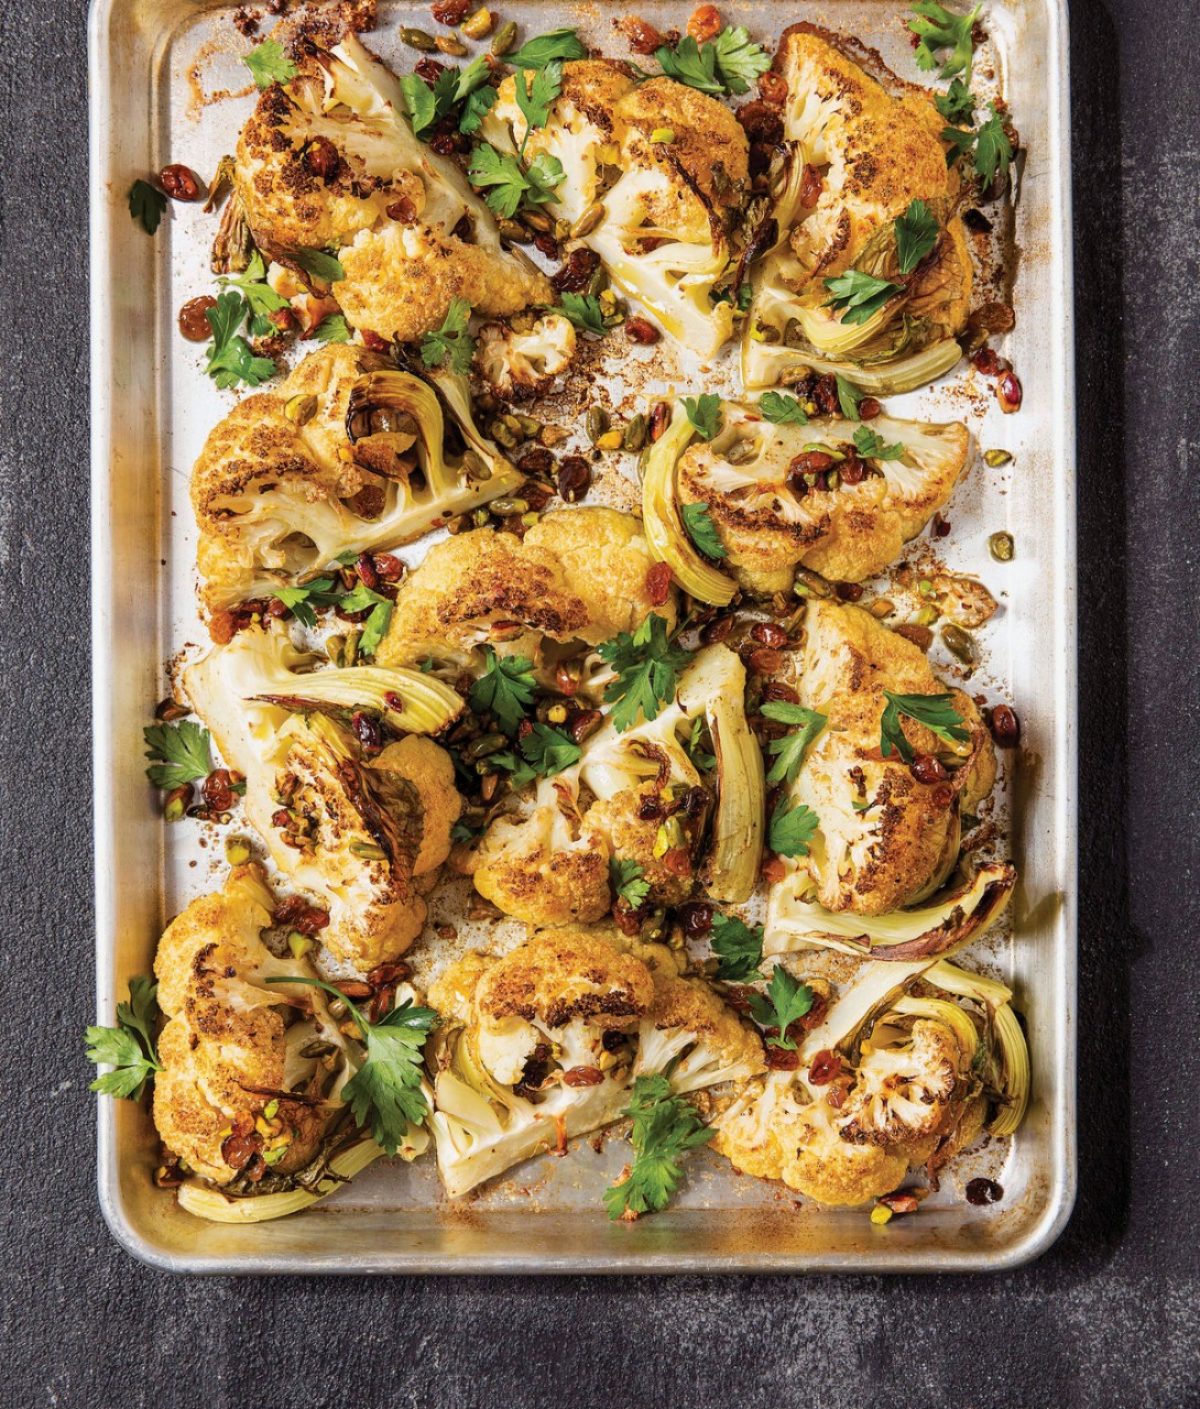 Roasted cauliflower with pistachios and golden raisins